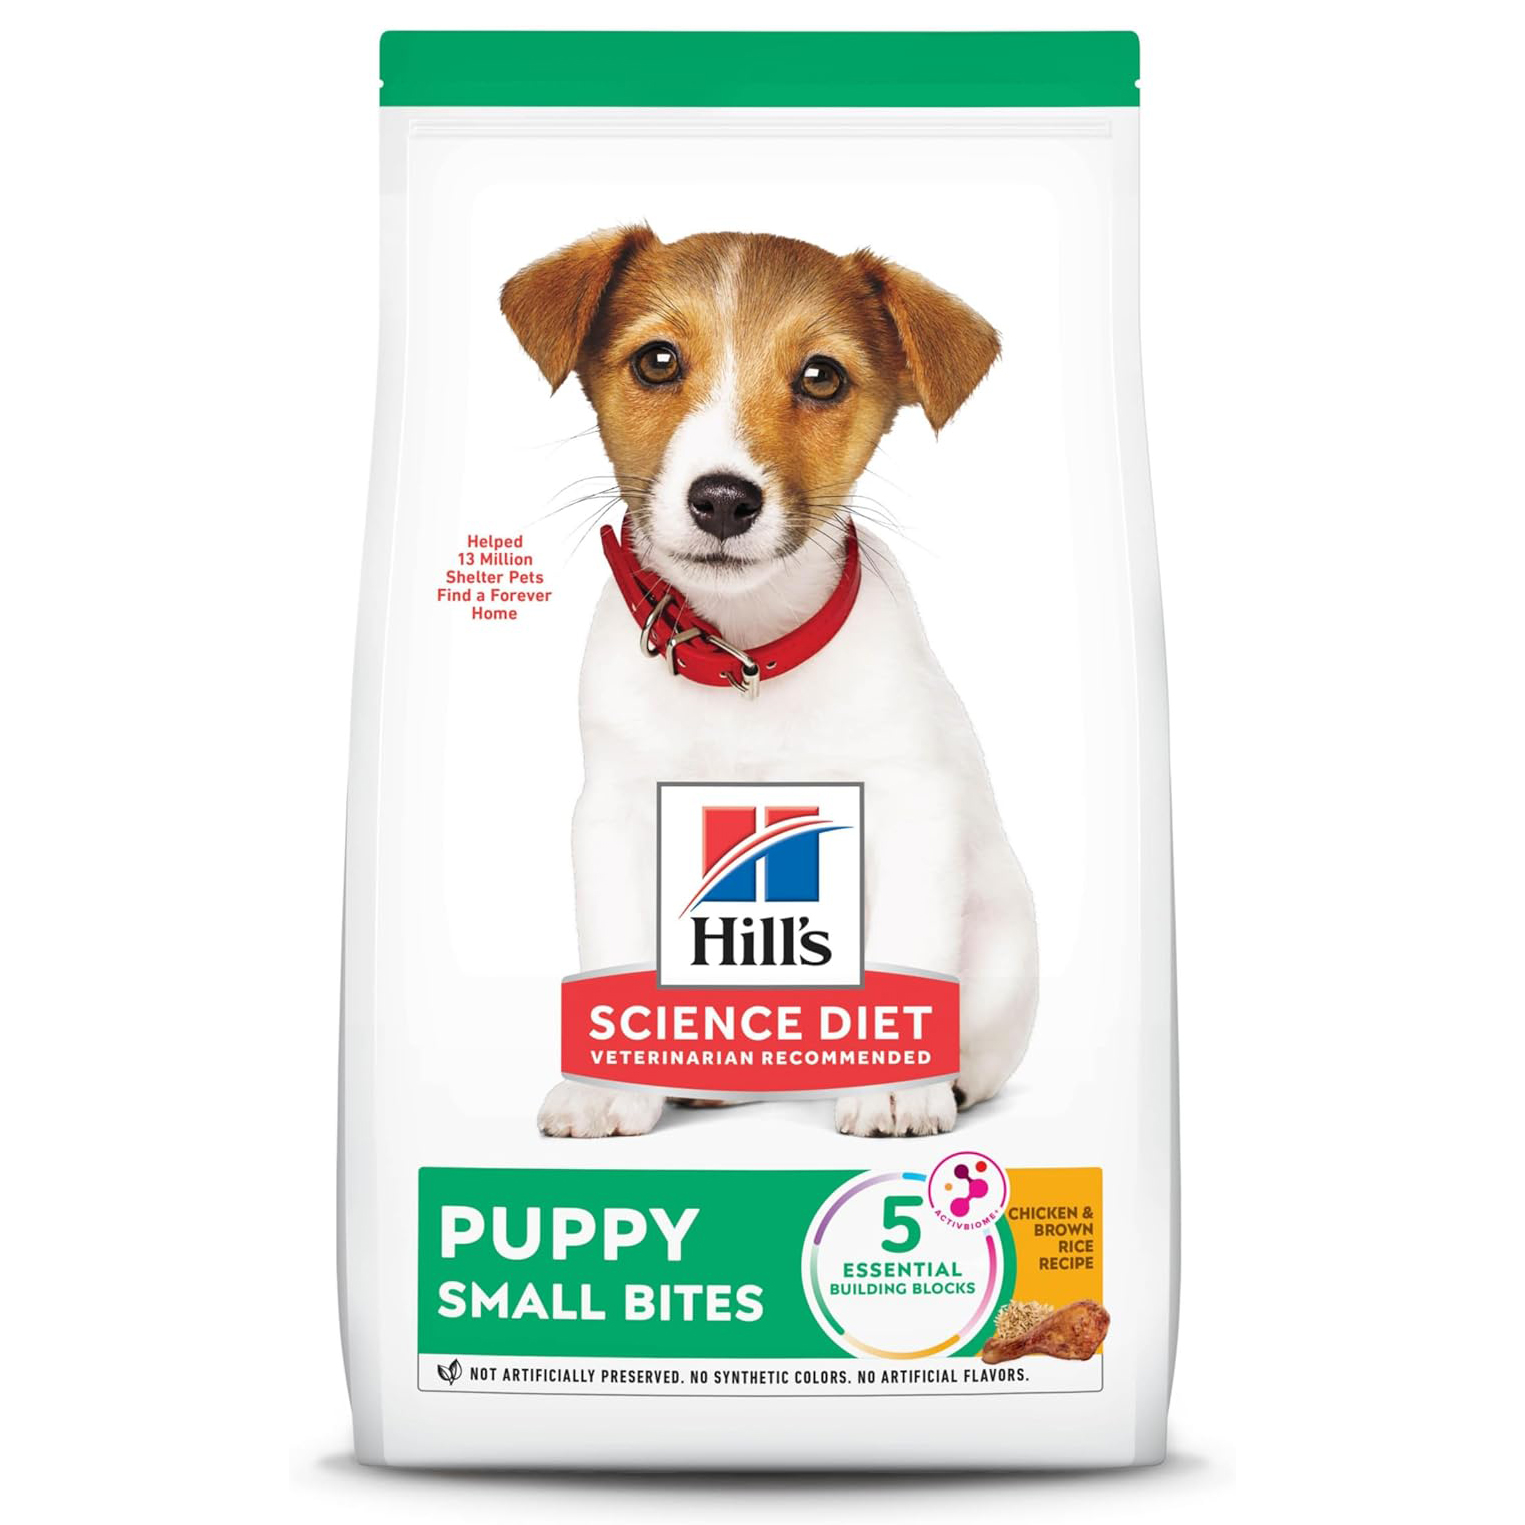 Hill’s Science Diet Small Bites Puppy Food